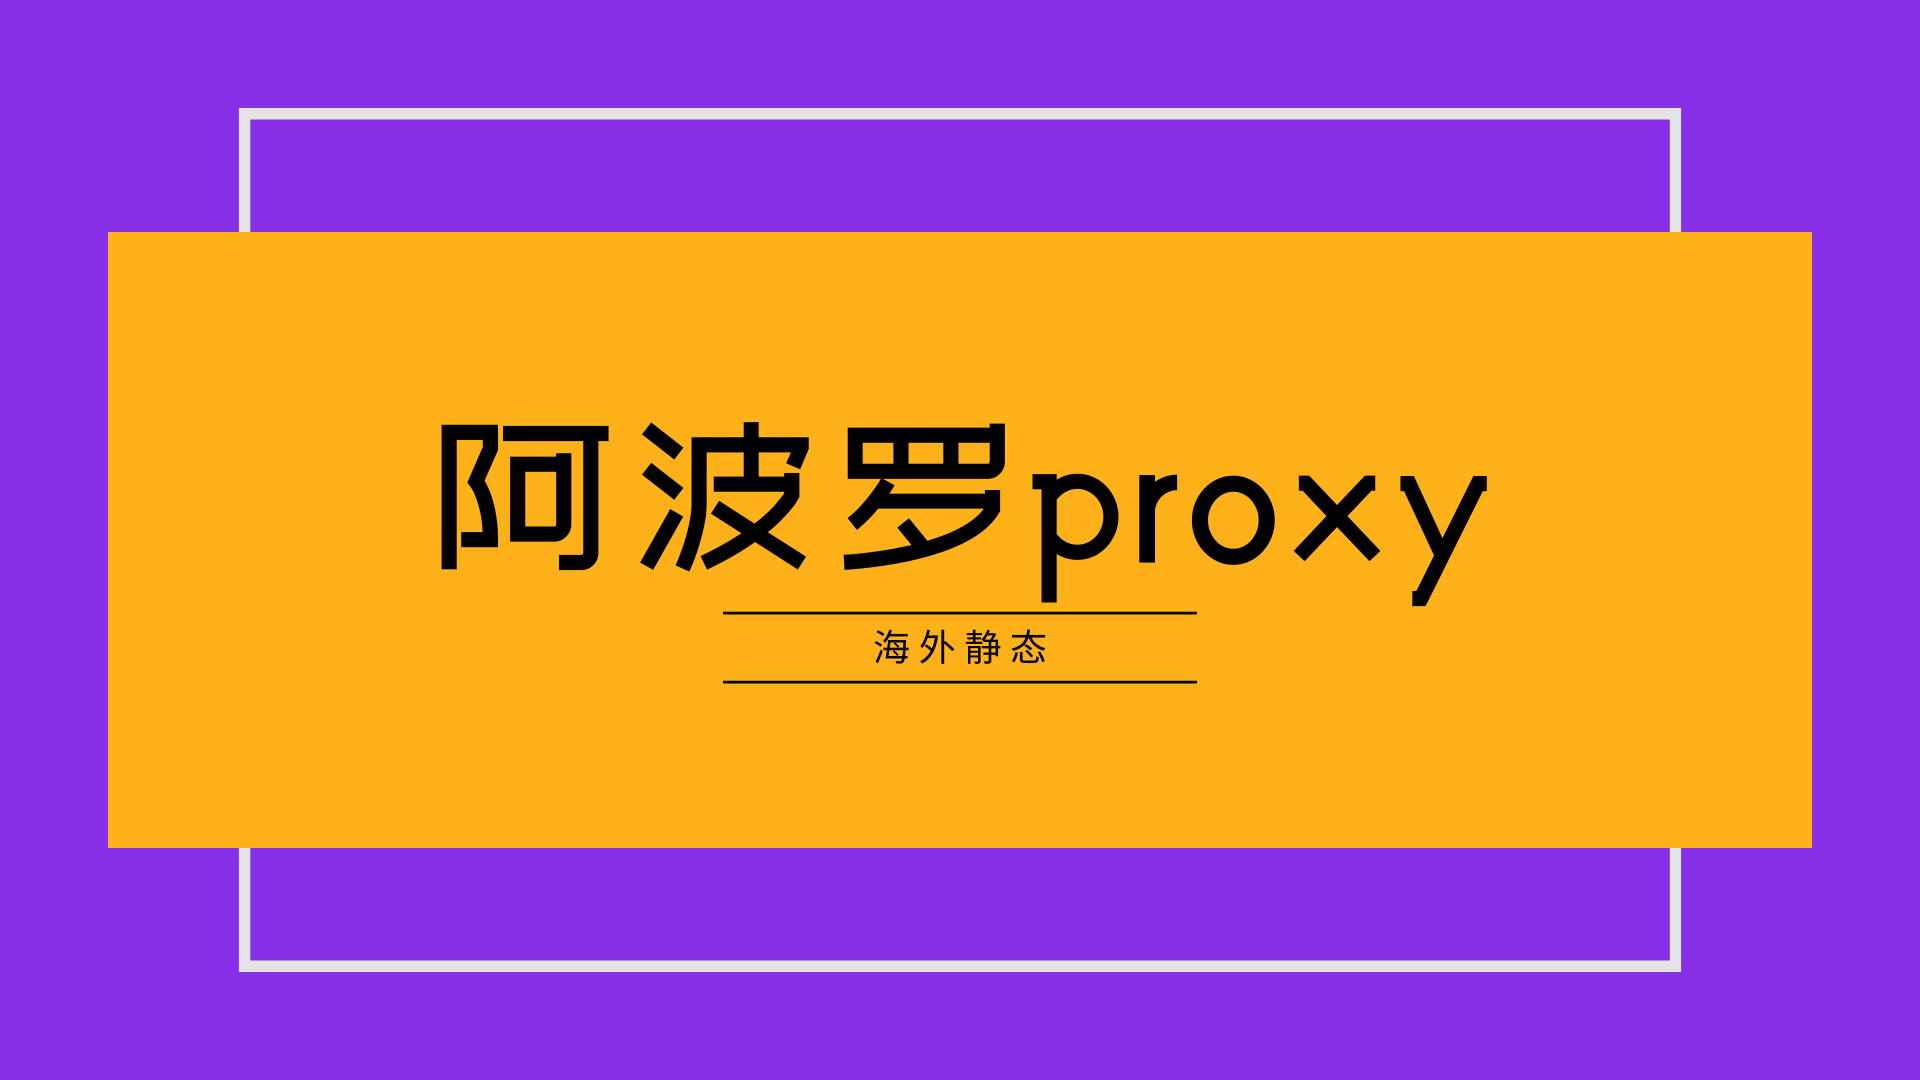 A_proxy.png